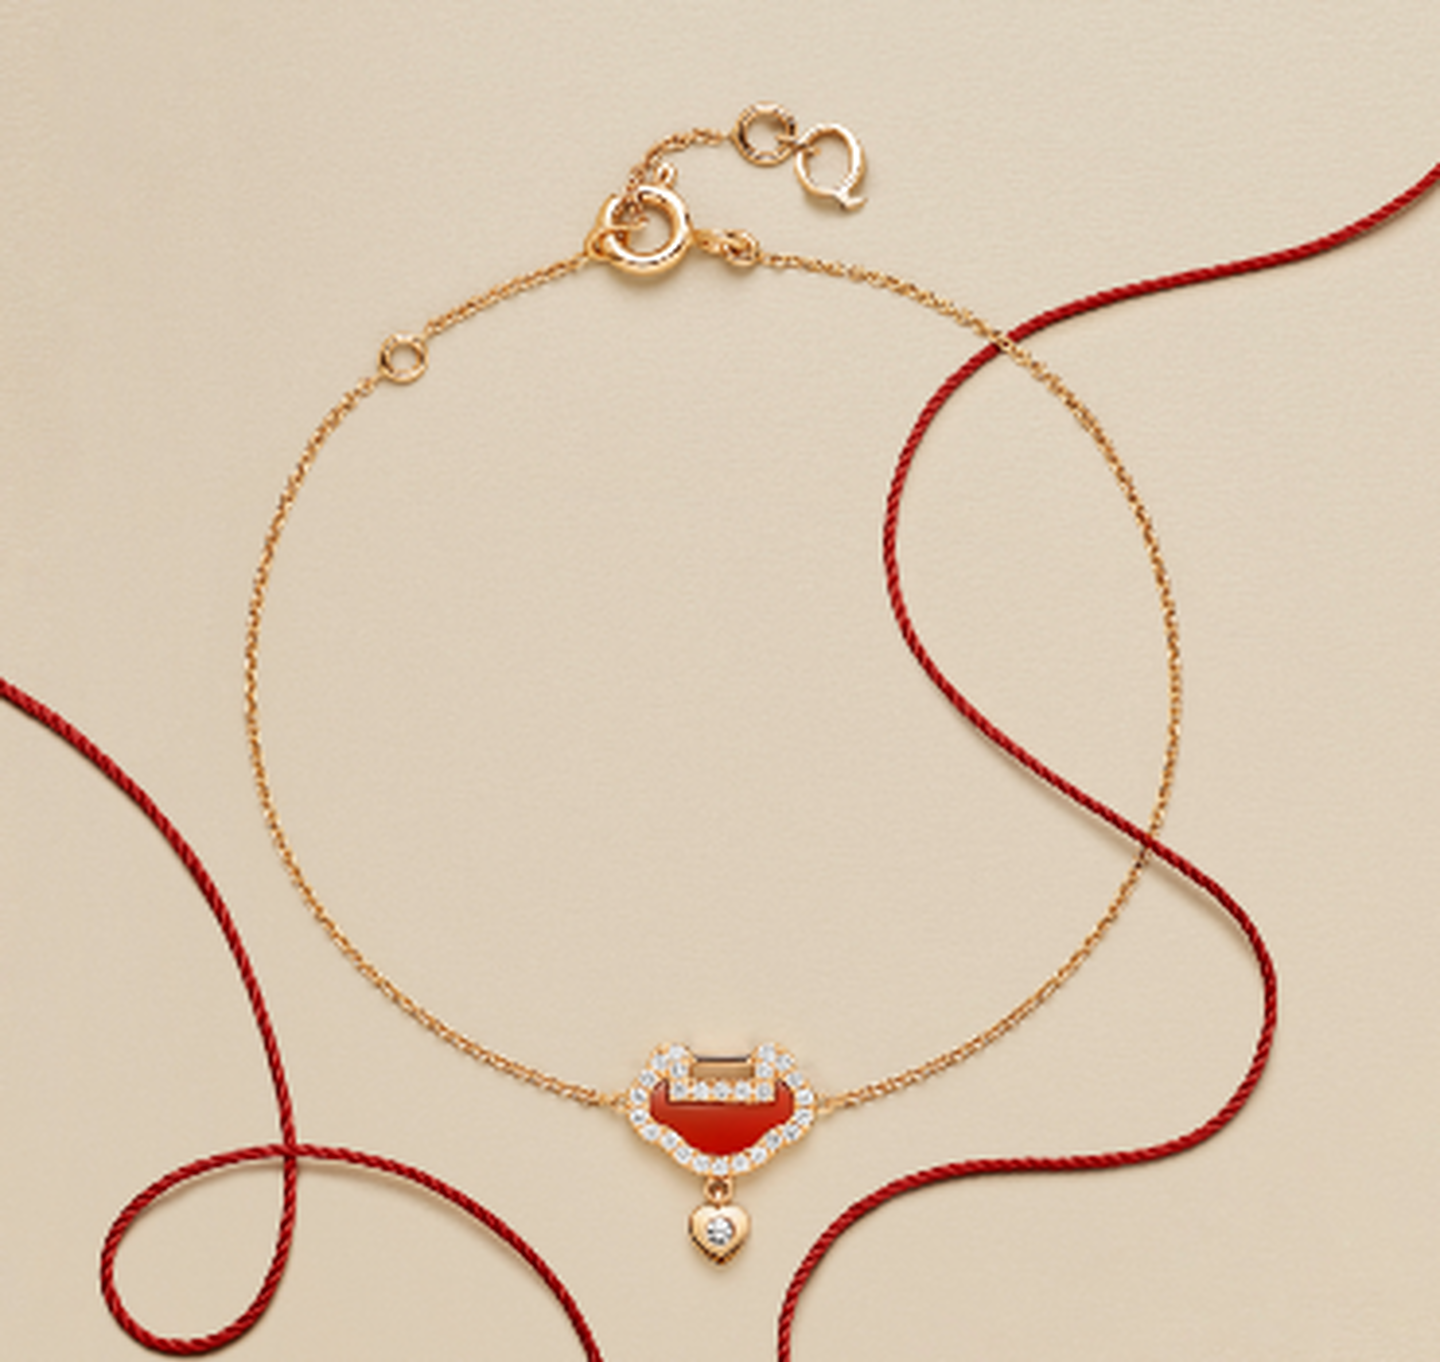 A Qeelin Yu Yi rose gold, red agate and diamond bracelet on a beige background.